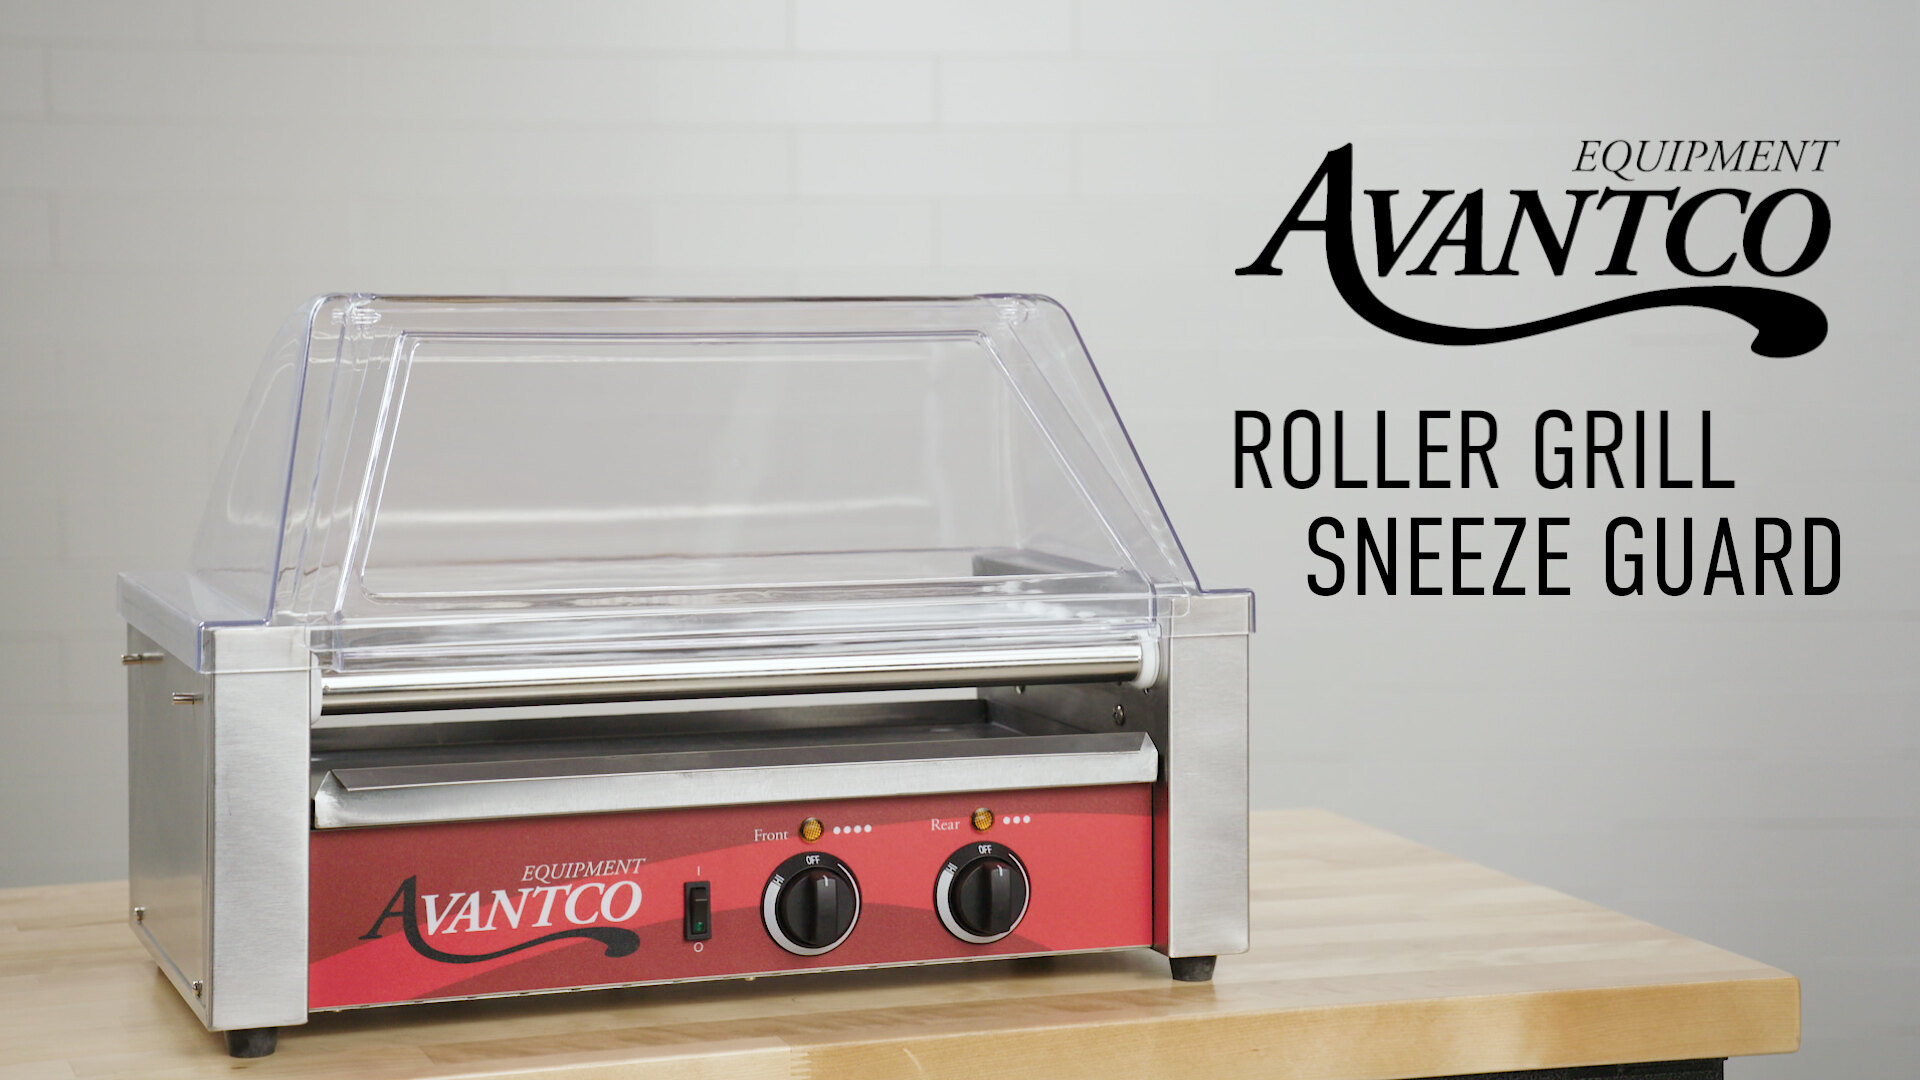 Details about   Avantco 12 Hot Dog Roller Grill Sneeze Guard for Avantco RG1812 Grill Restaurant 